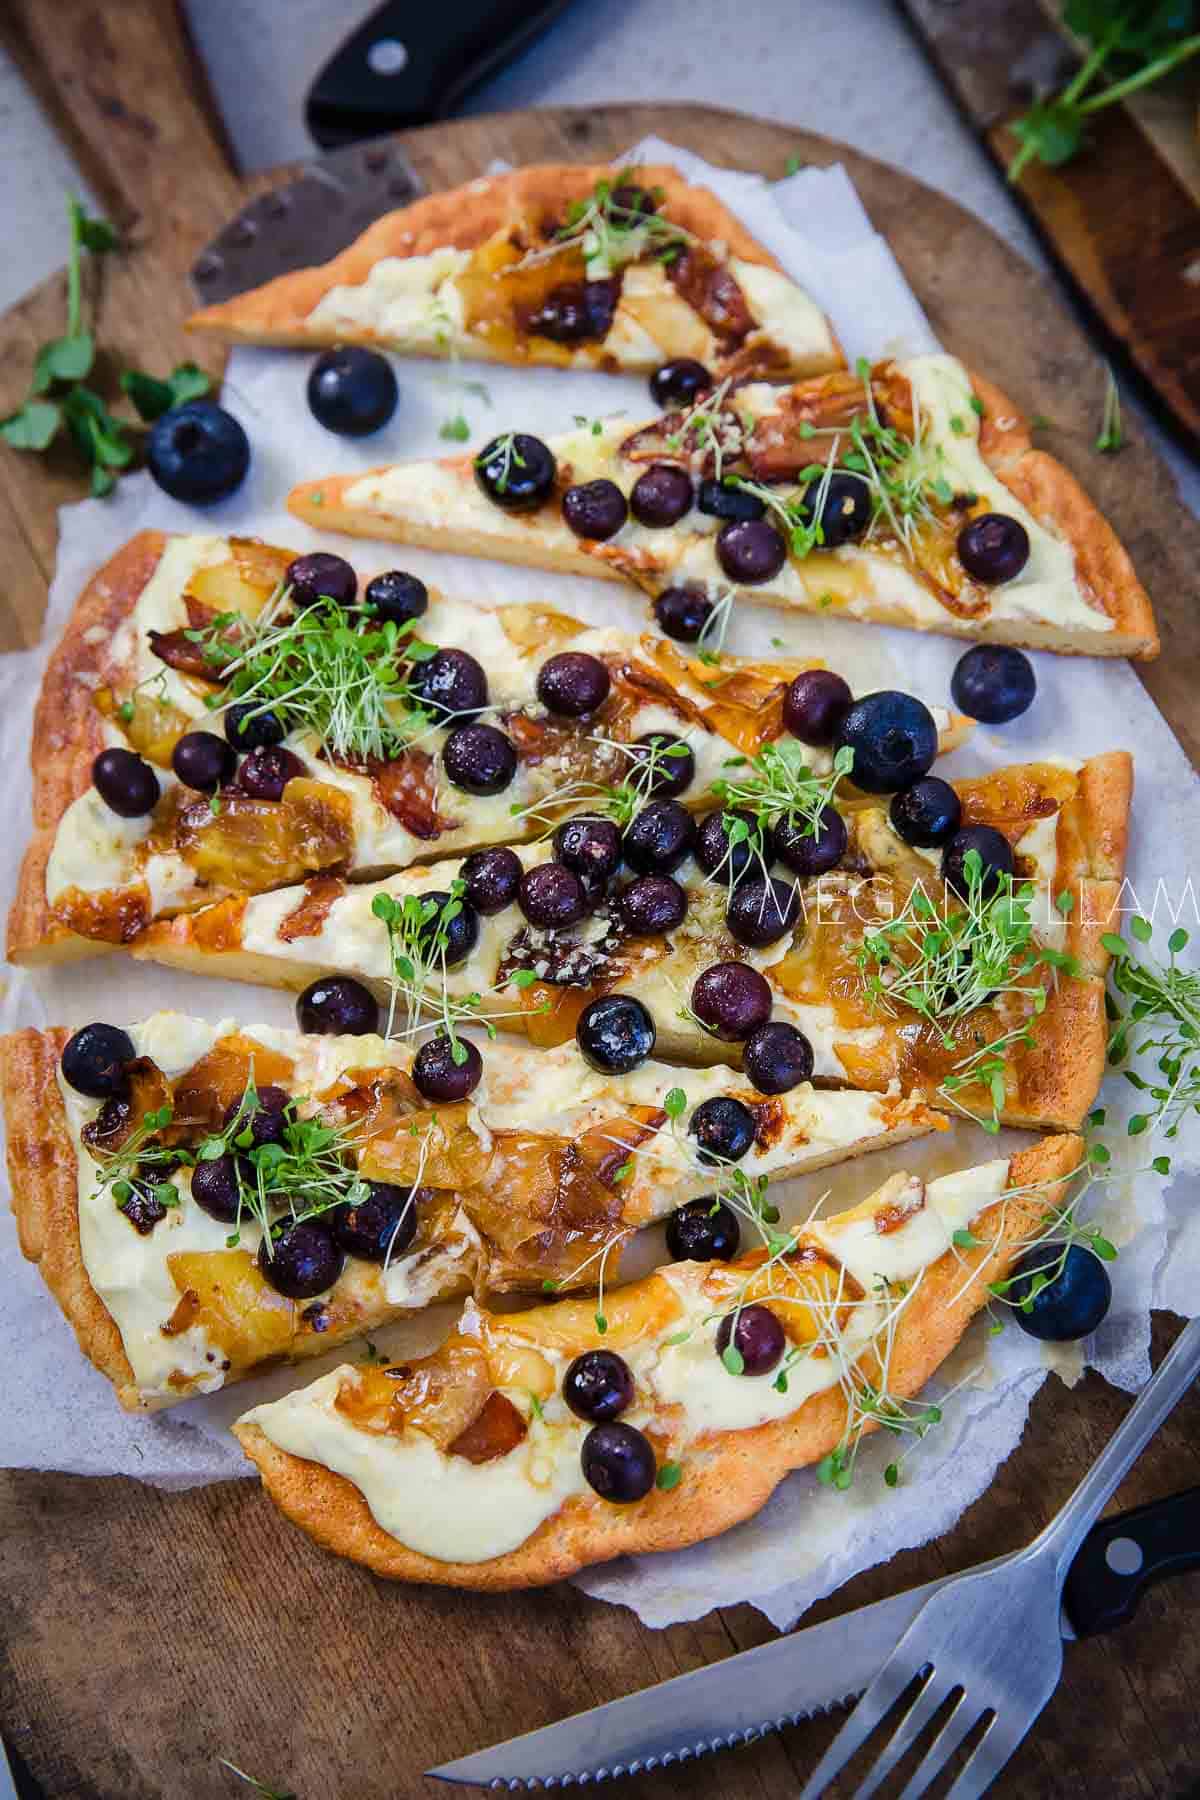 A keto pizza with caramelized onions to demonstrate that onions are keto friendly.